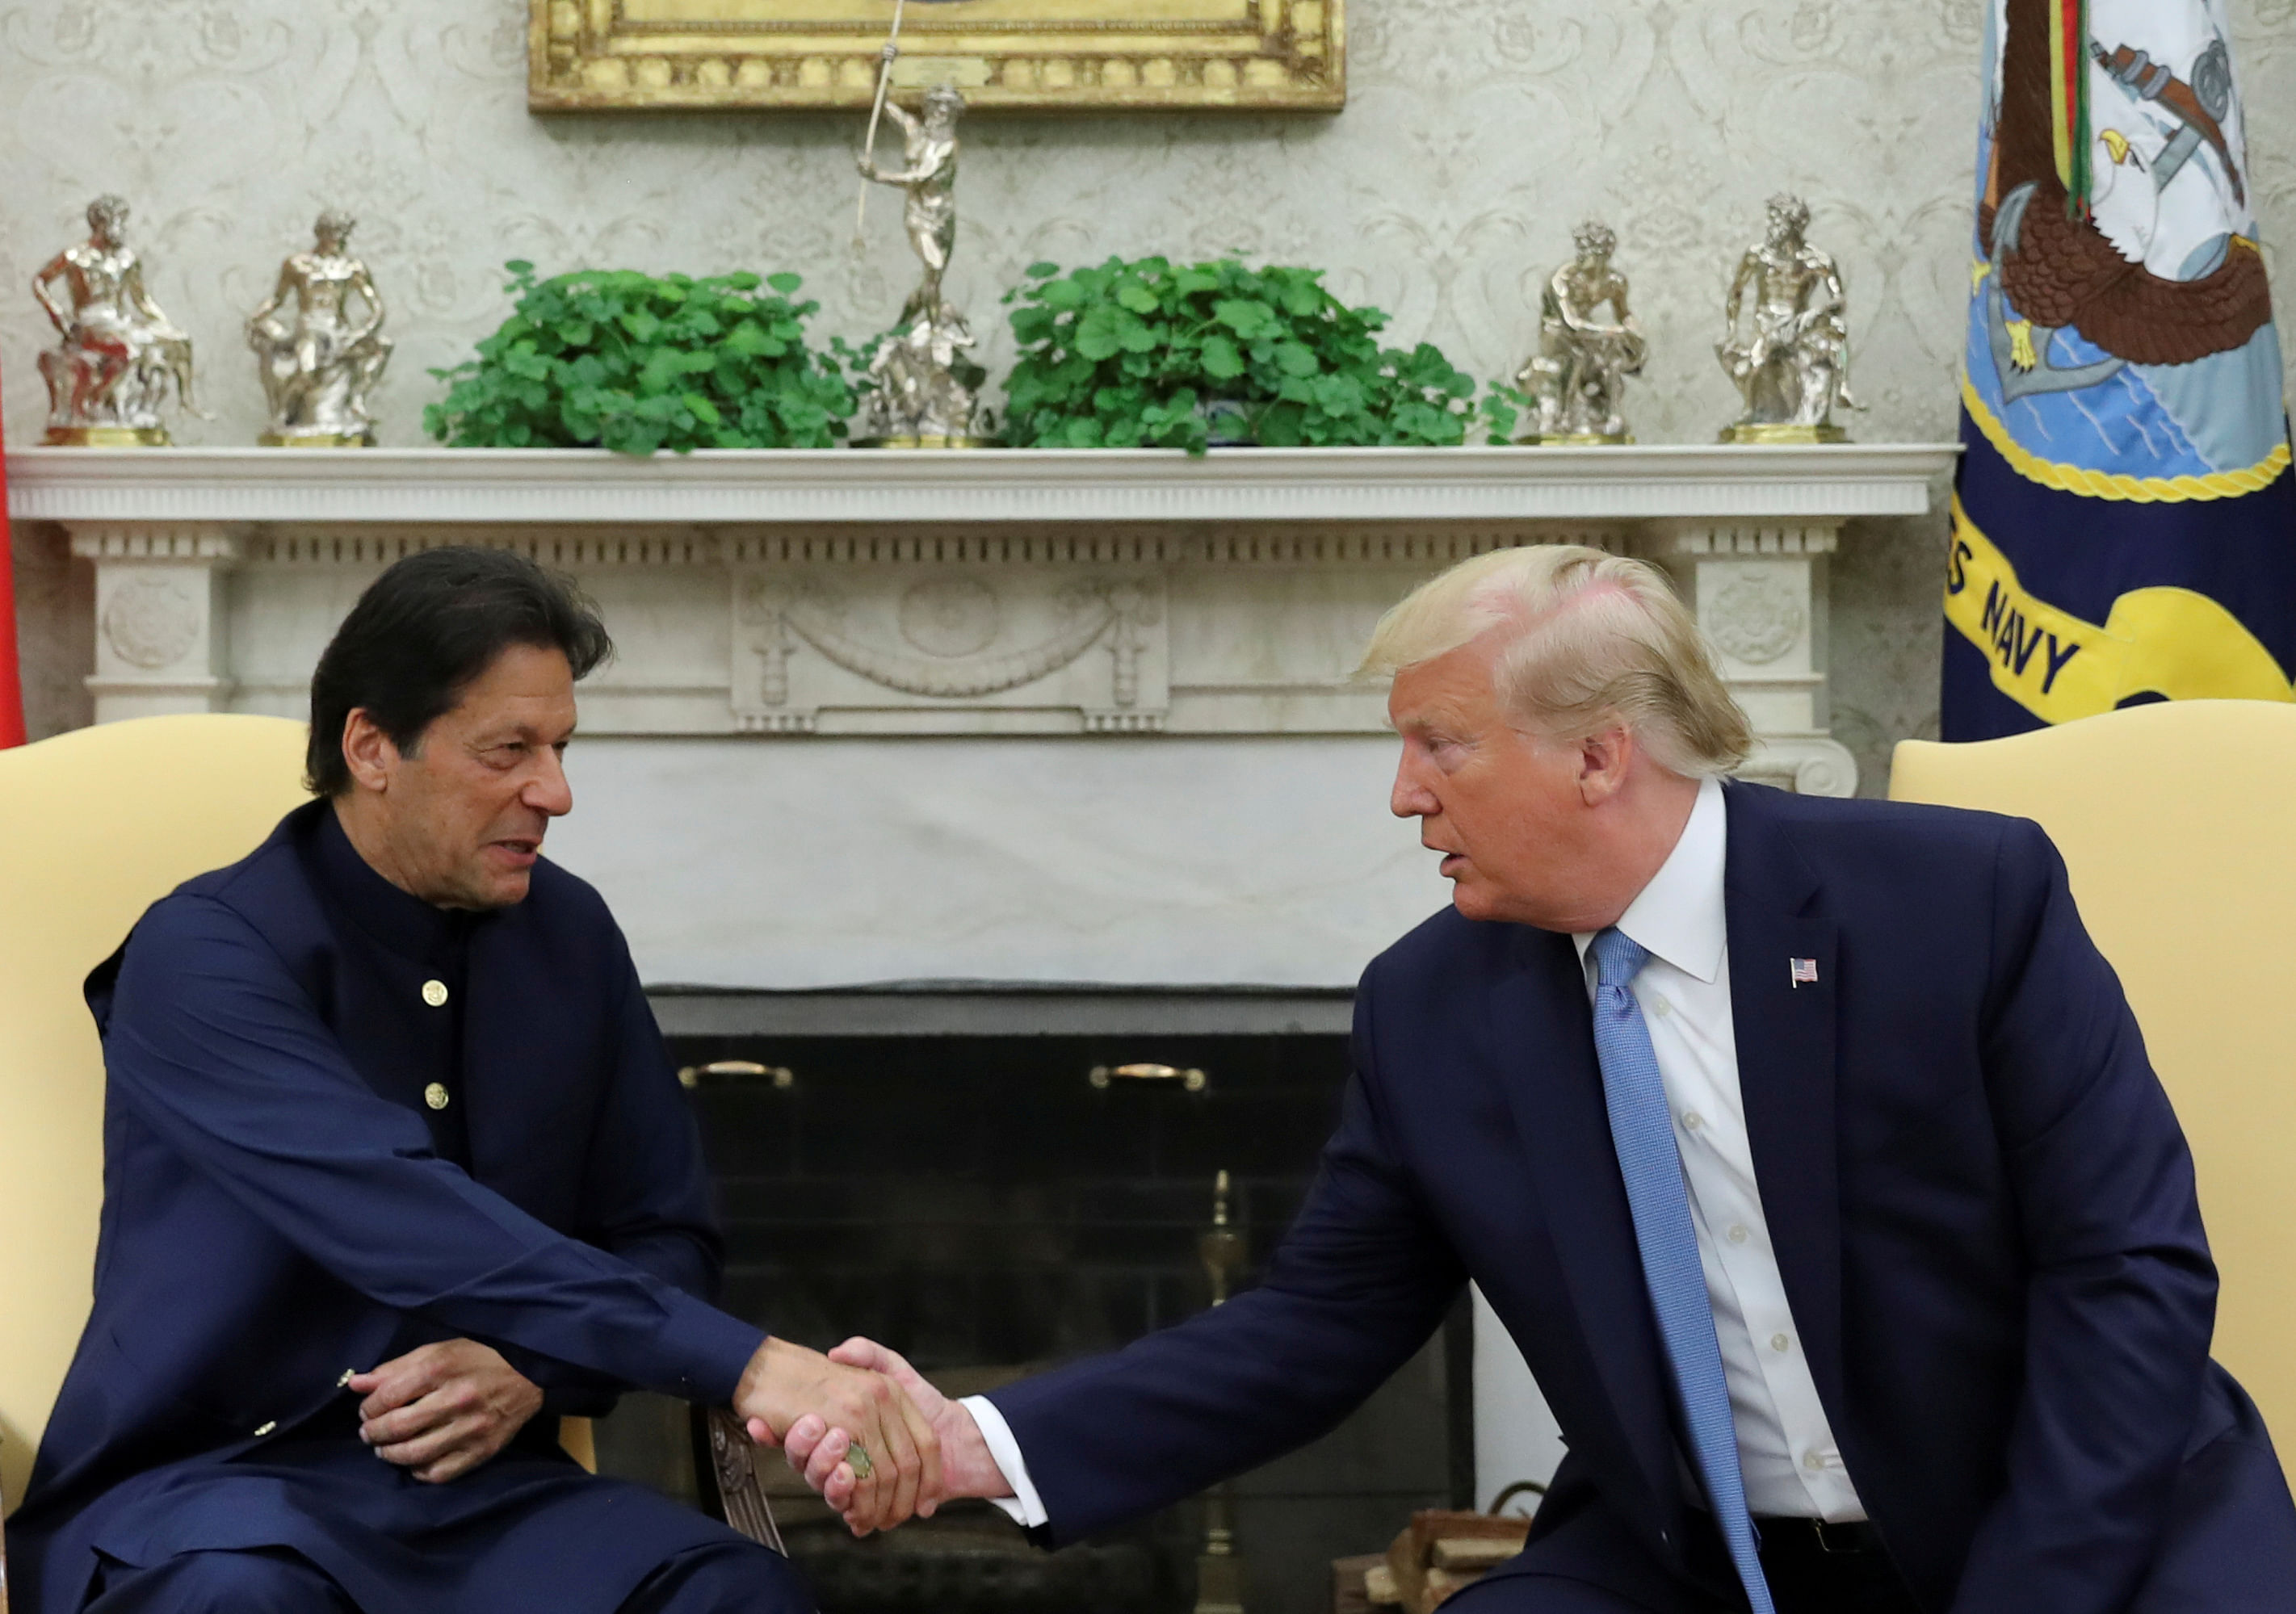 U.S. President Donald Trump greets Pakistan's Prime Minister Imran Khan in the Oval Office at the White House in Washington. (Reuters Photo)